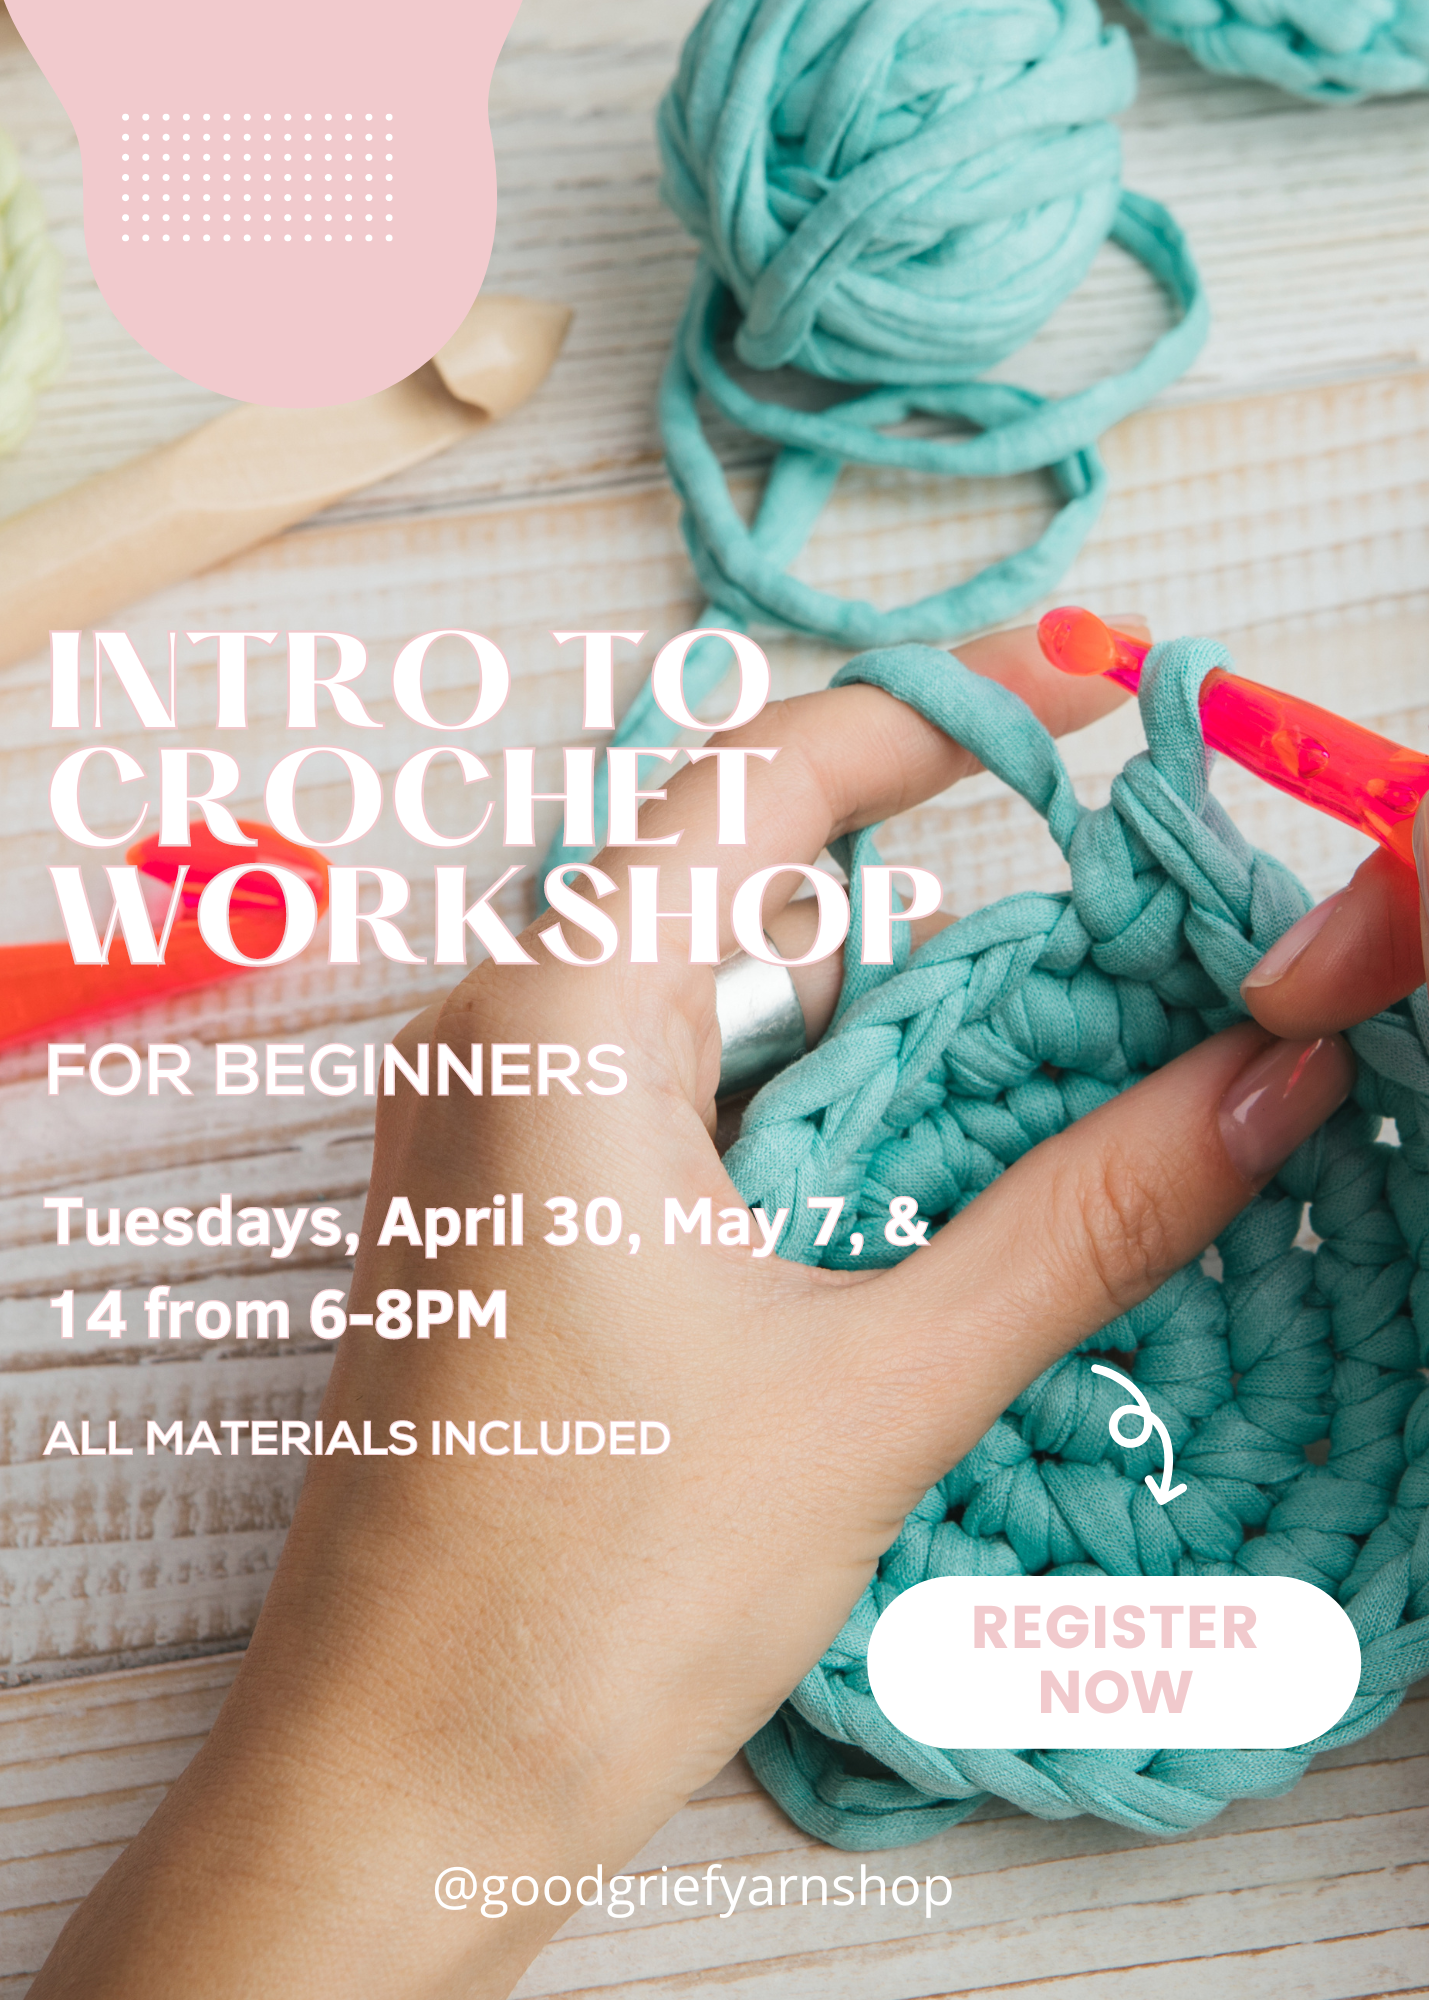 Intro to Crochet Workshop: Tuesdays, April 30, May 7, & 14th from 6-8PM